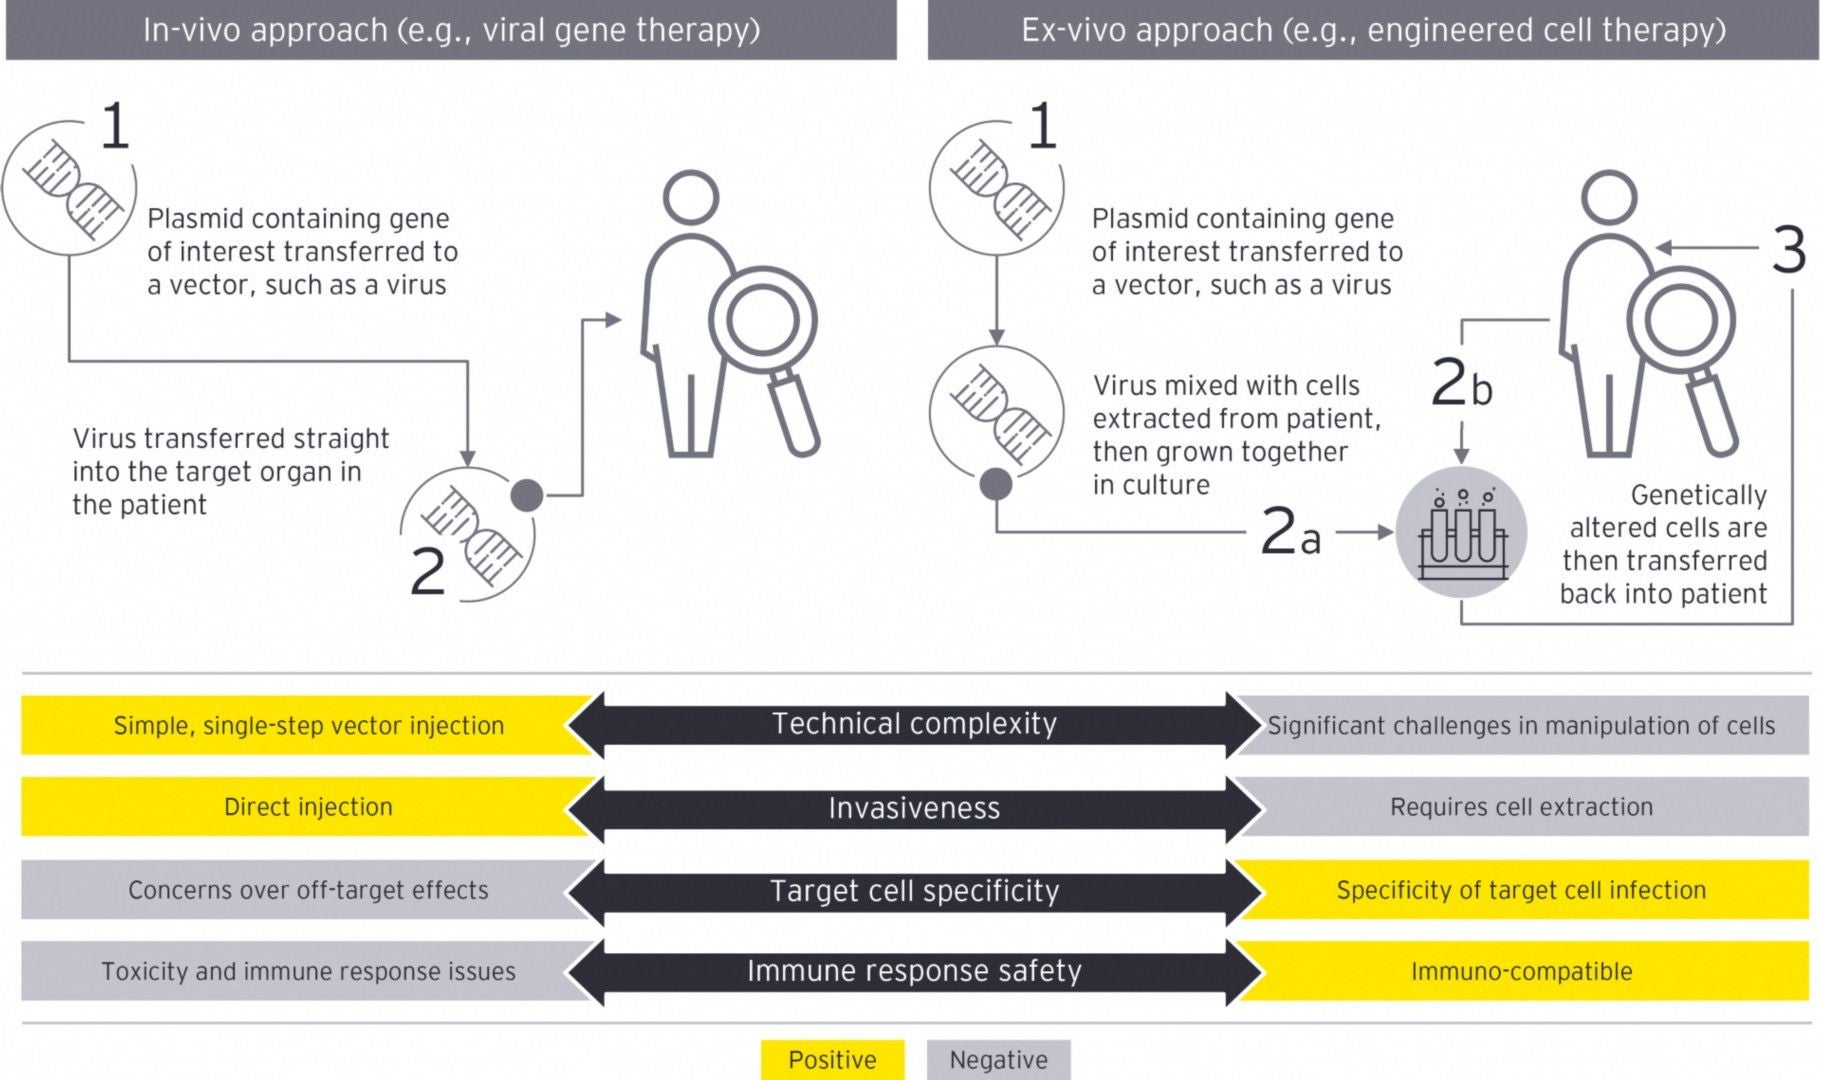 Chart-for-ey-com-life-sciences-article-overview-of-cell-and-gene-therapy